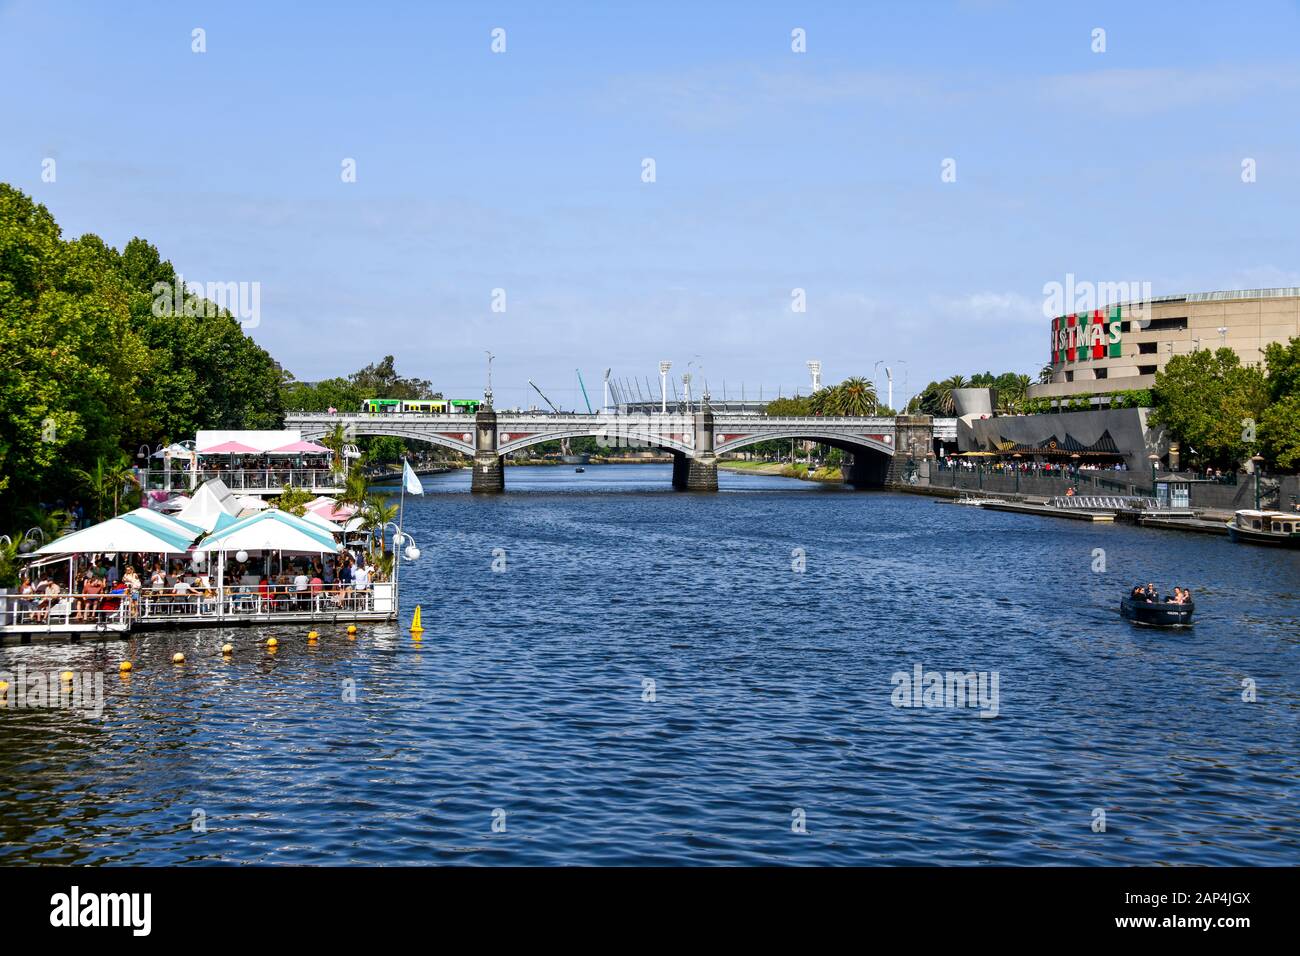 Lazy sunny afternoon on the Yarra River, Melbourne, Australia with floating restaurant, boats, bridge, tram and MGG in background Stock Photo